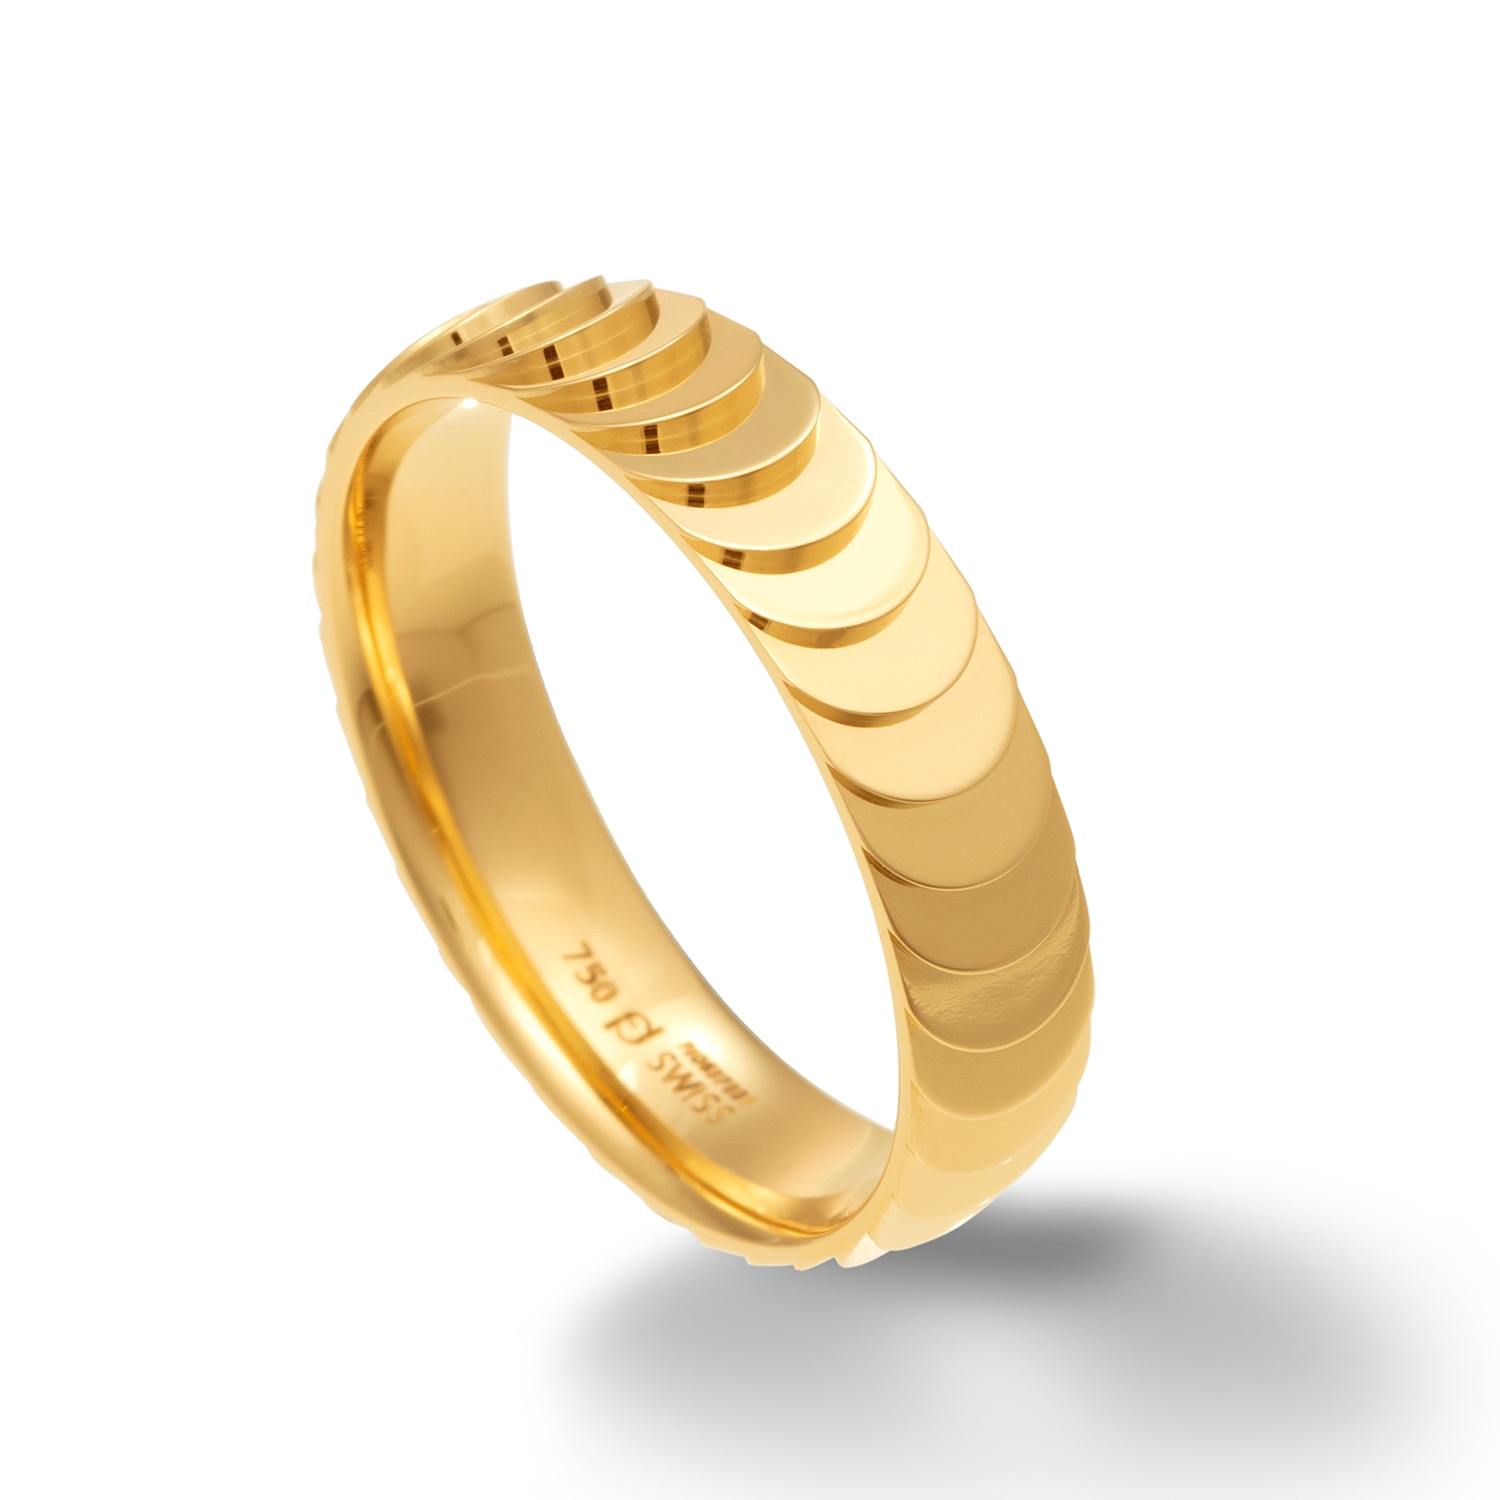 Buy Gold Thumb Rings at Best Prices Online at Tata CLiQ